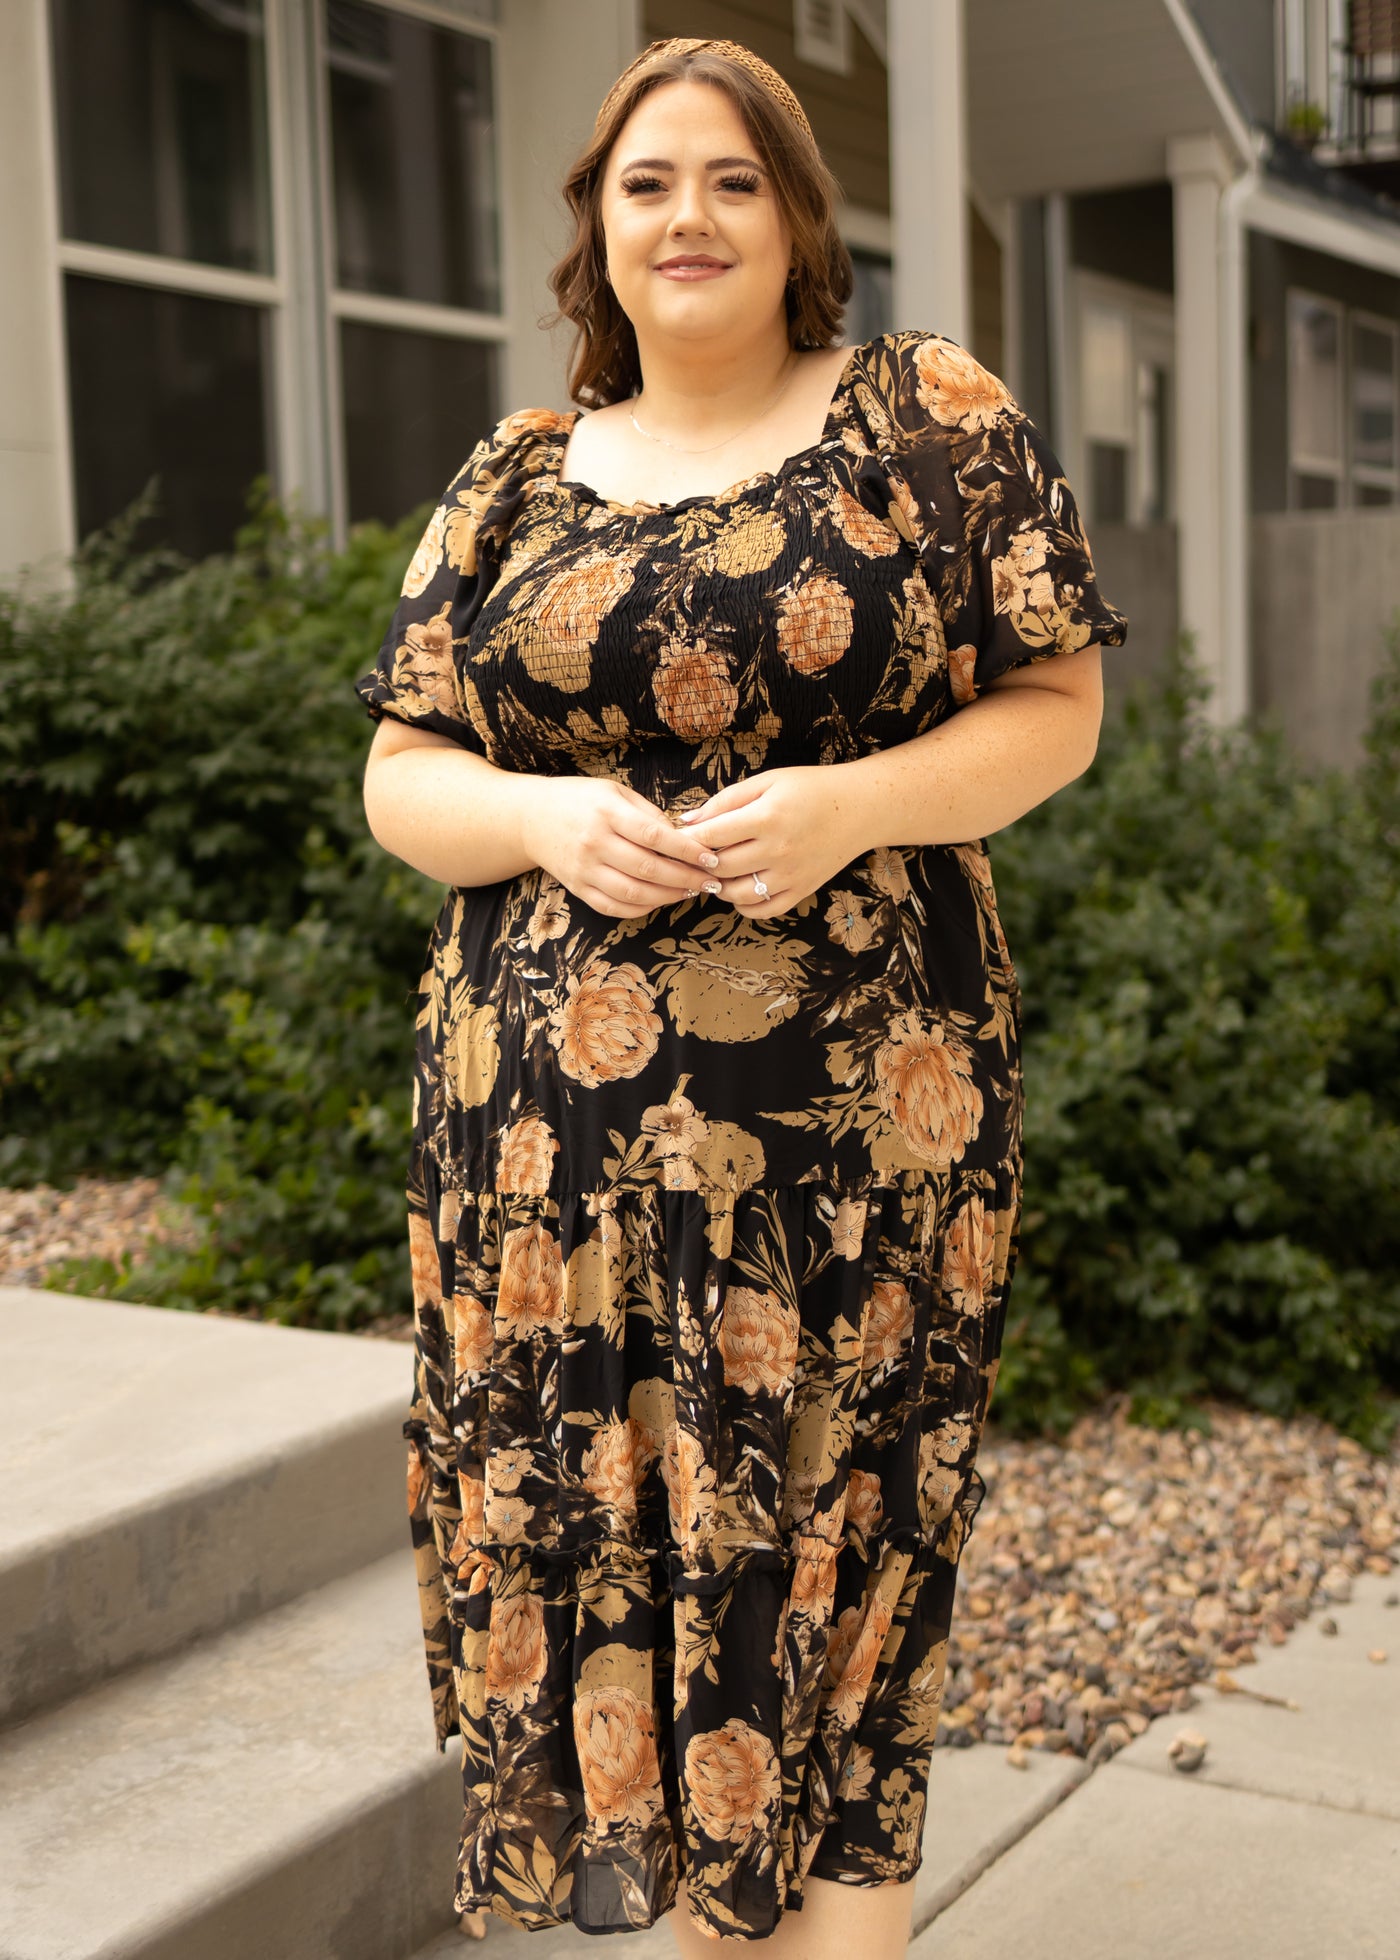 Plus size black floral dress with short sleeves and tiered skirt